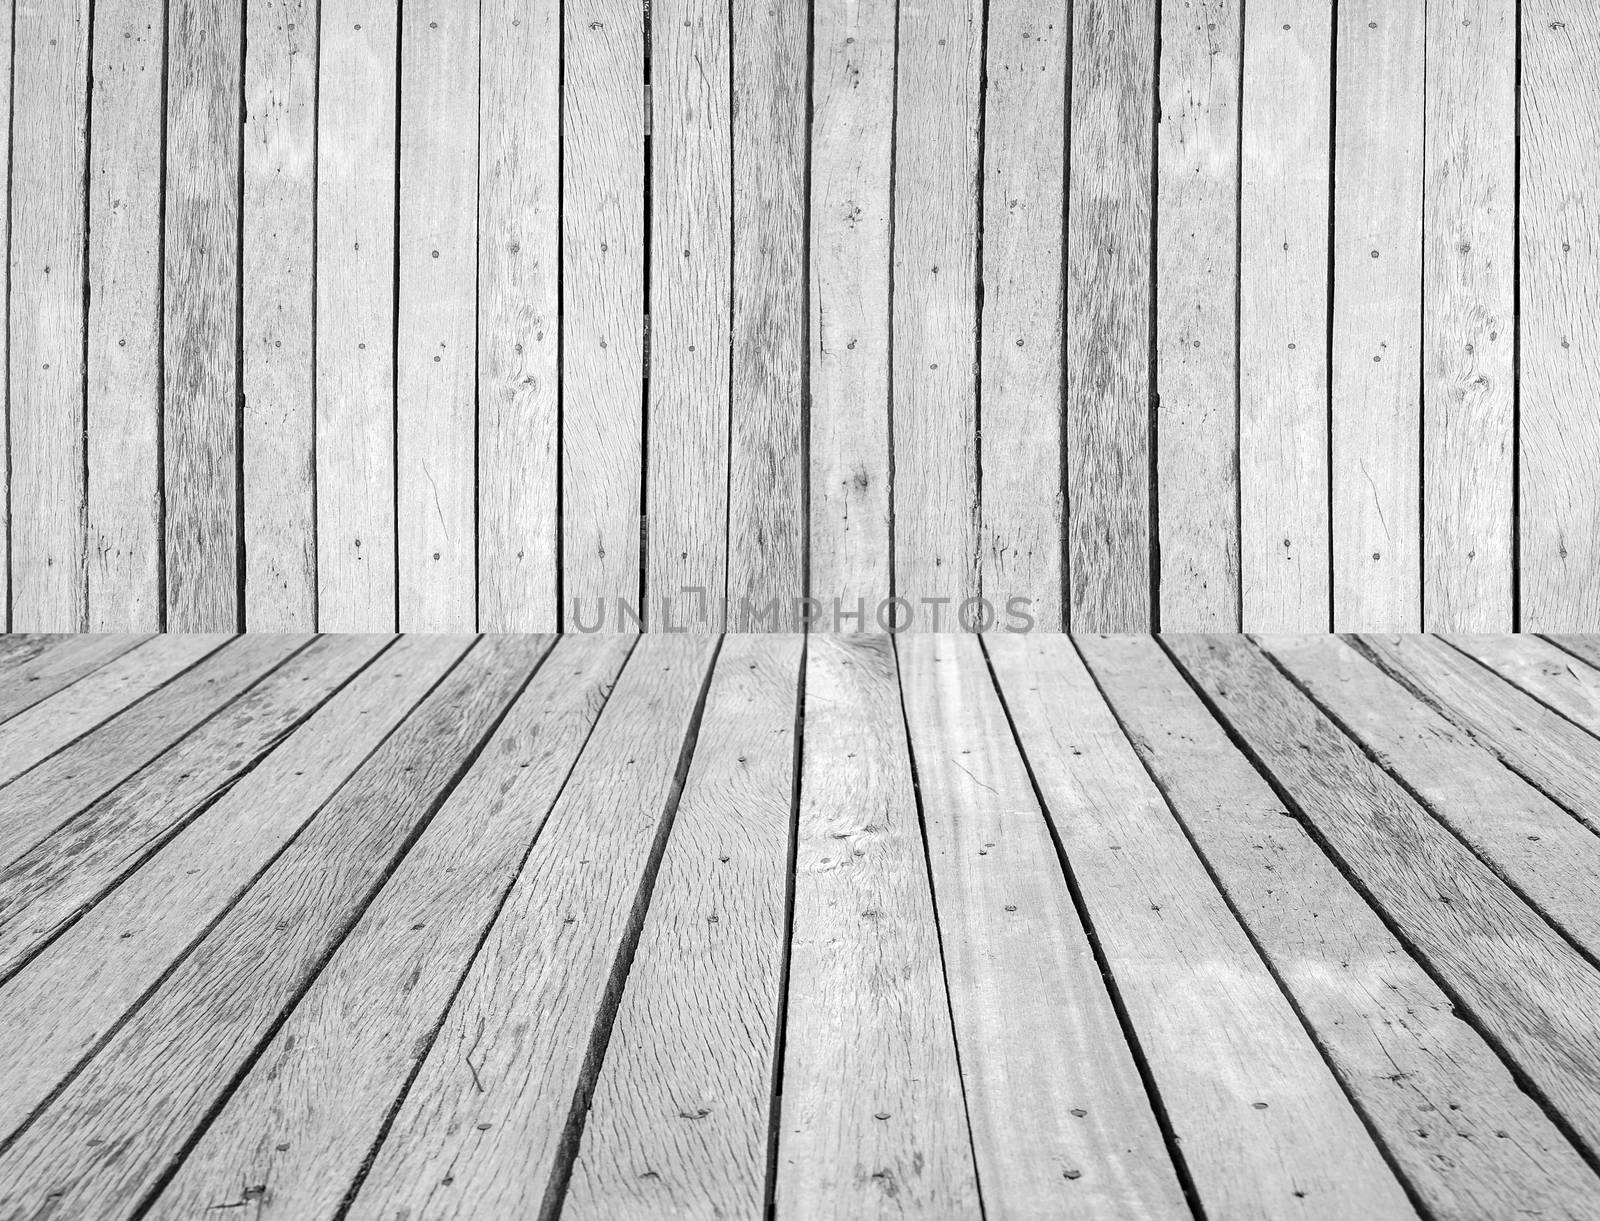 Wood background by seksan44